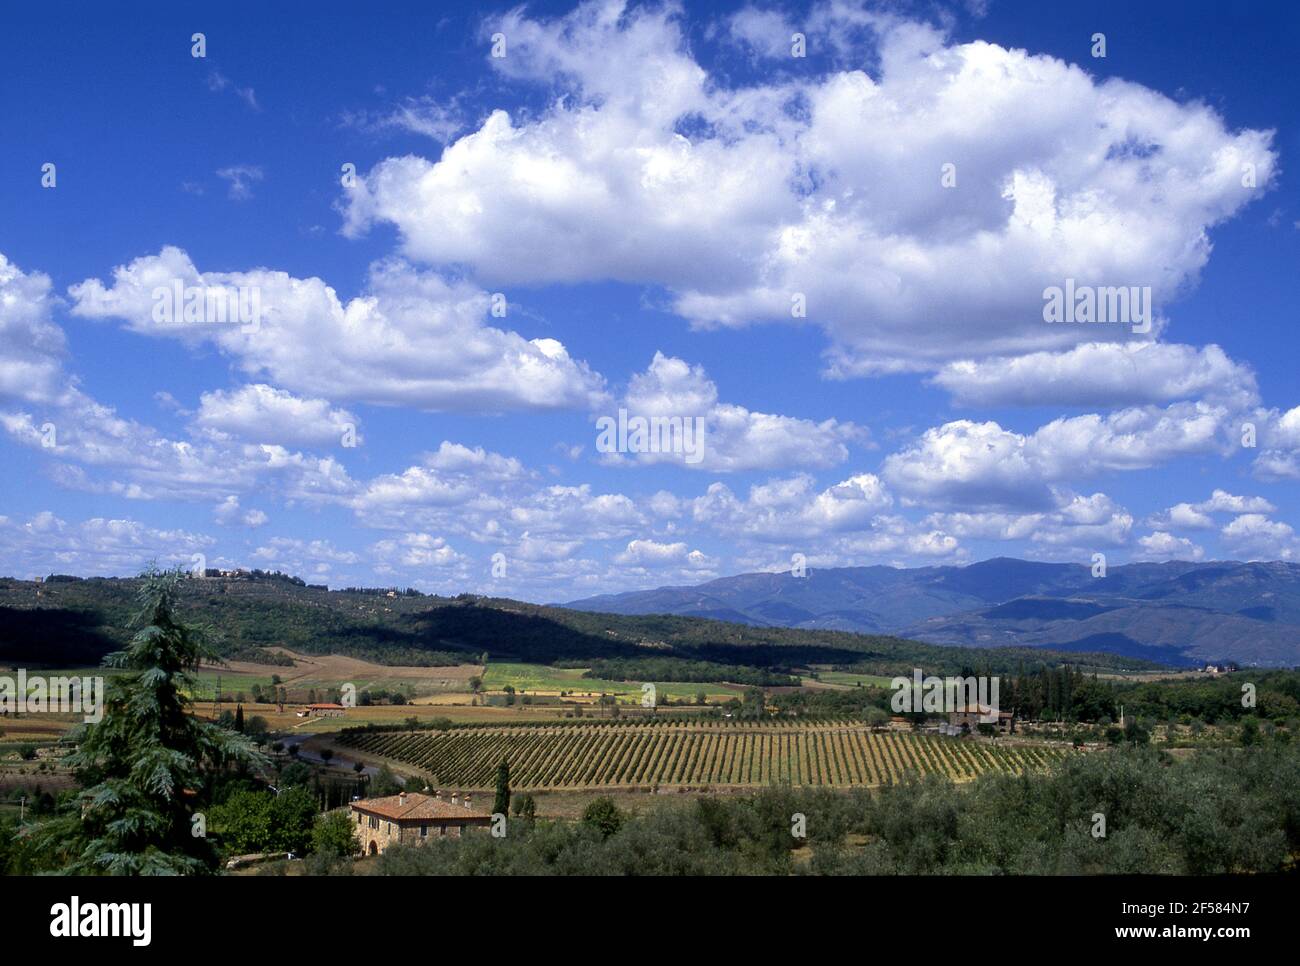 Agricultural landscape with farmhouse in the Valdarno region of Tuscany, Italy Stock Photo